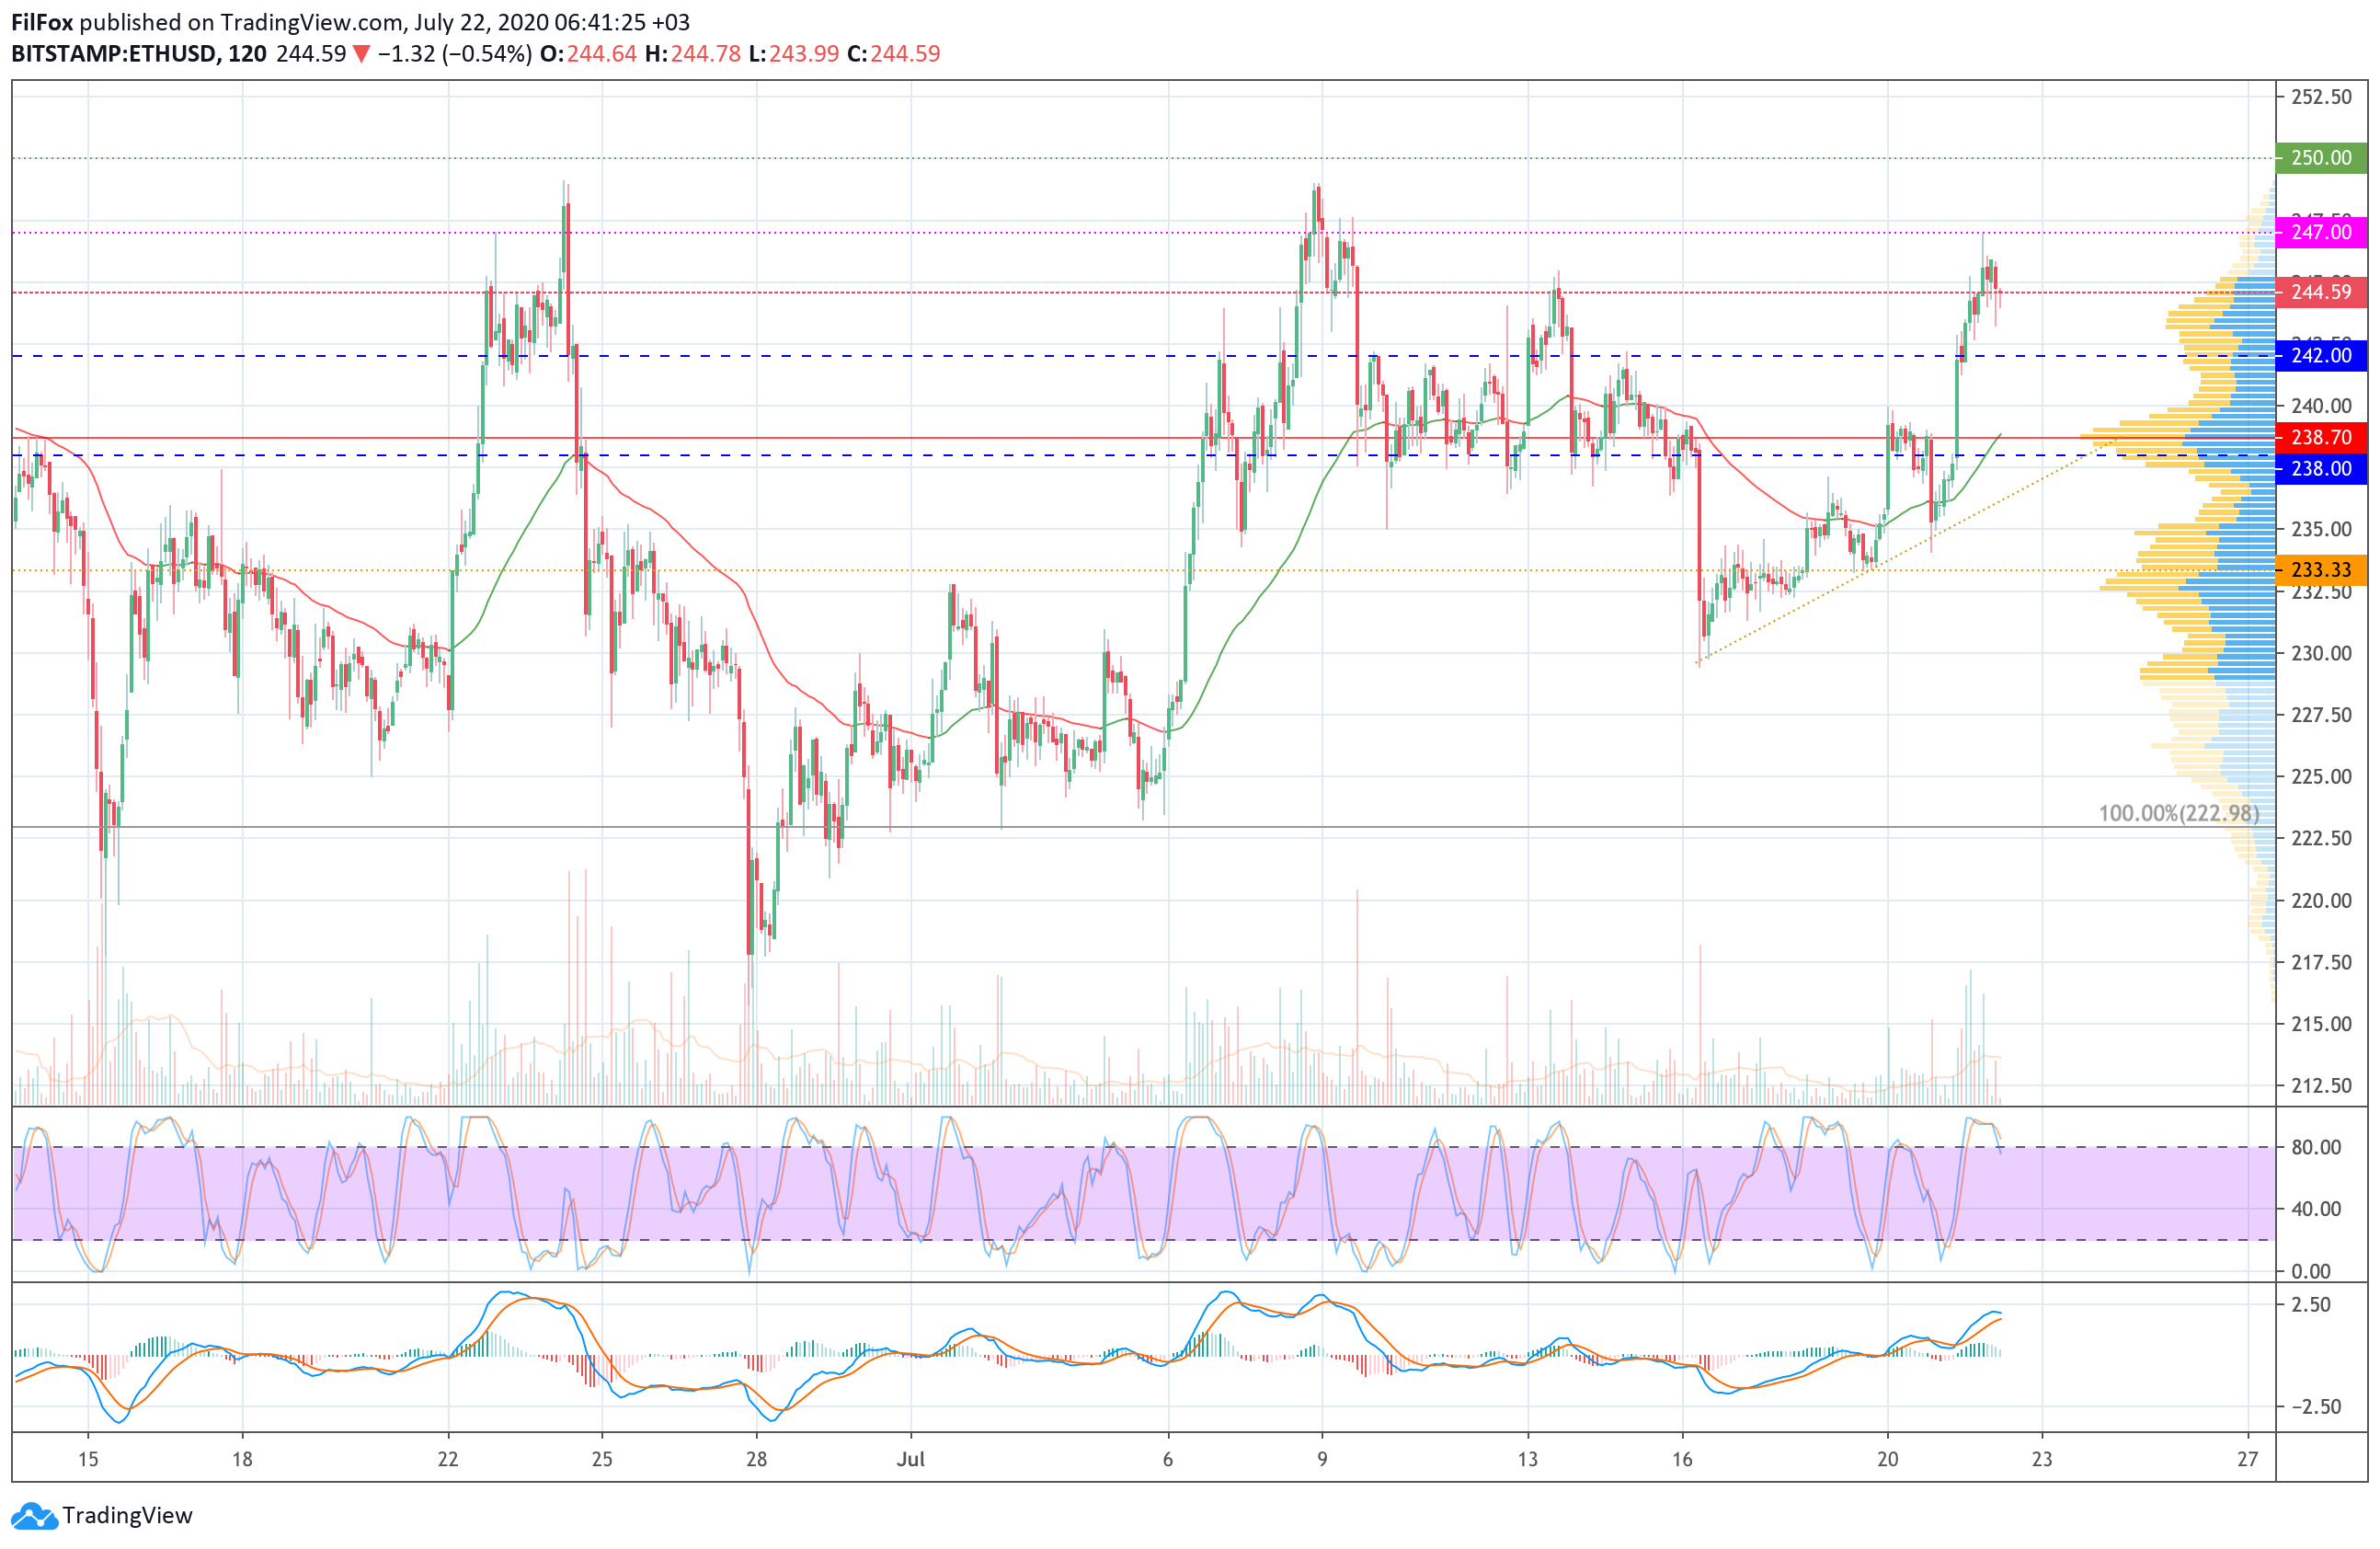 Analysis of prices for Bitcoin, Ethereum, XRP for 07/22/2020